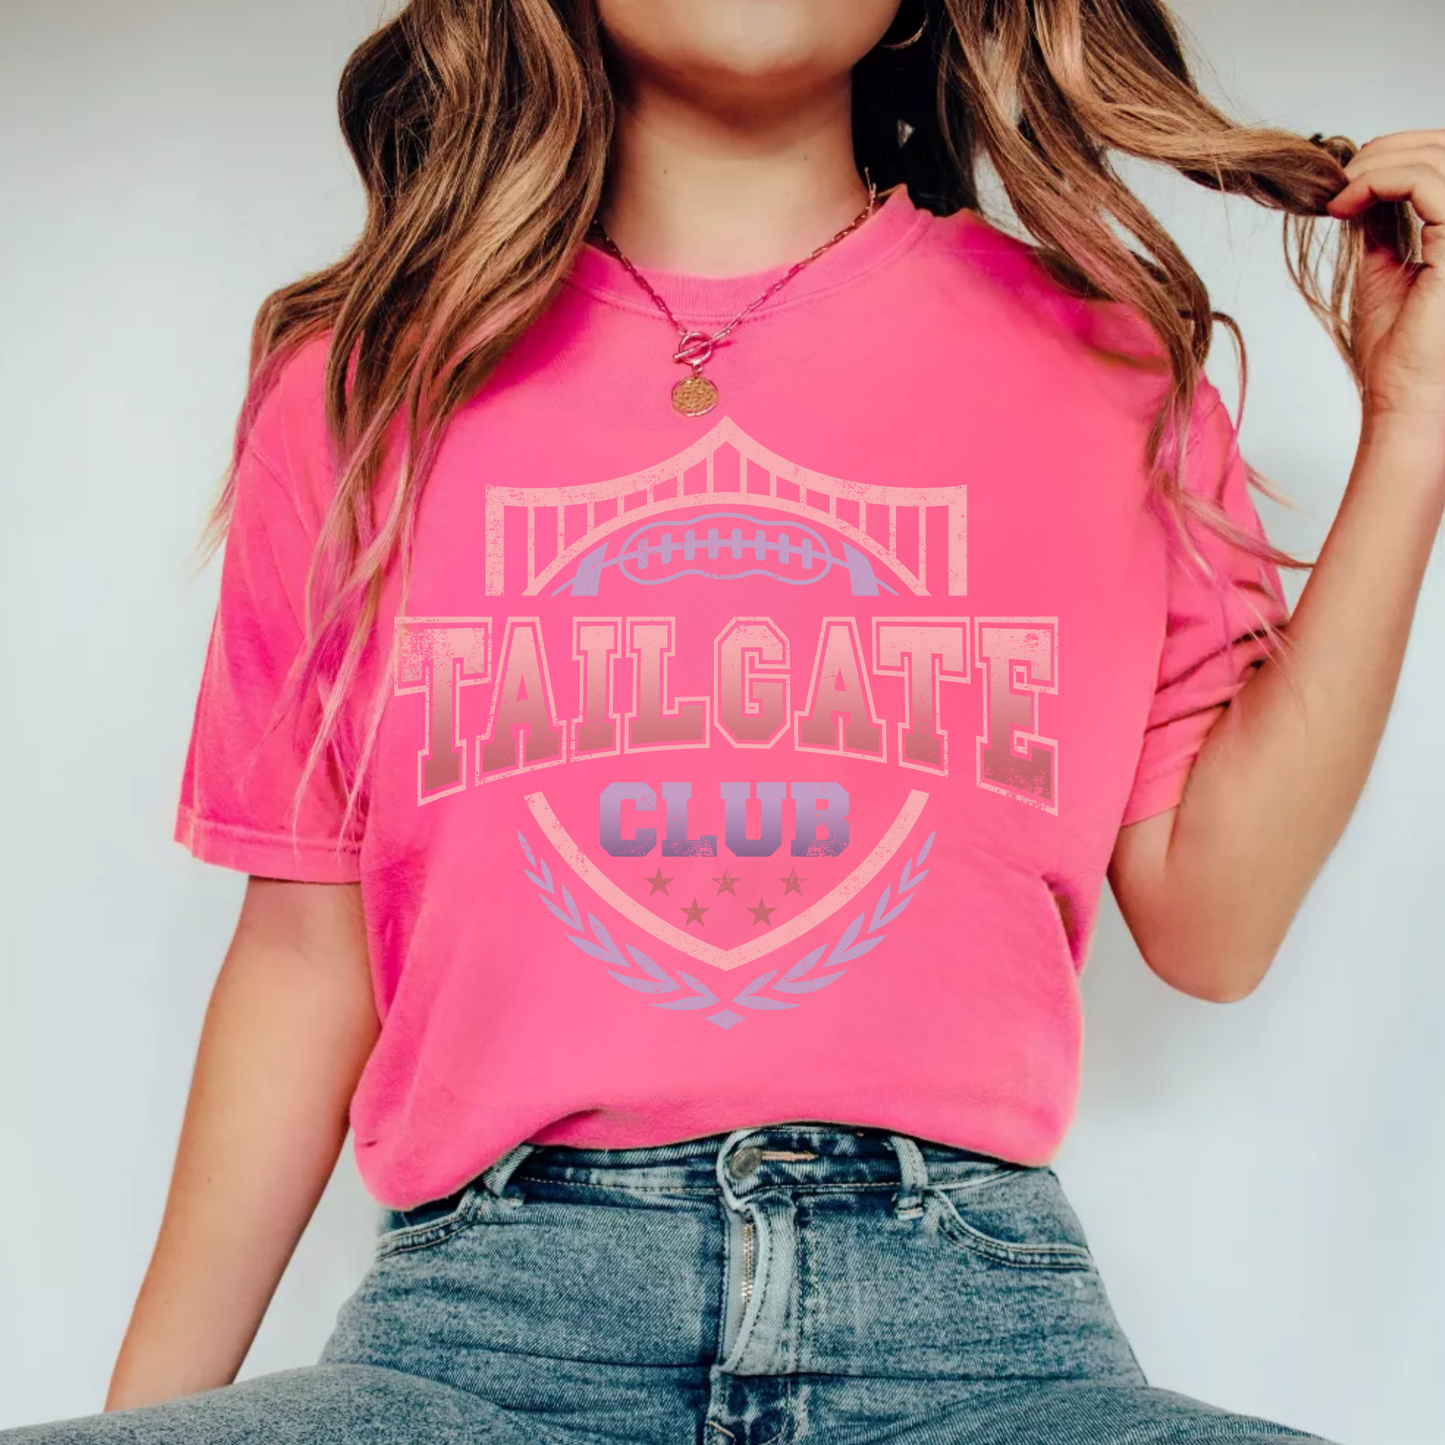 (Shirt not Included) Tailgate Club - Clear Film Transfer